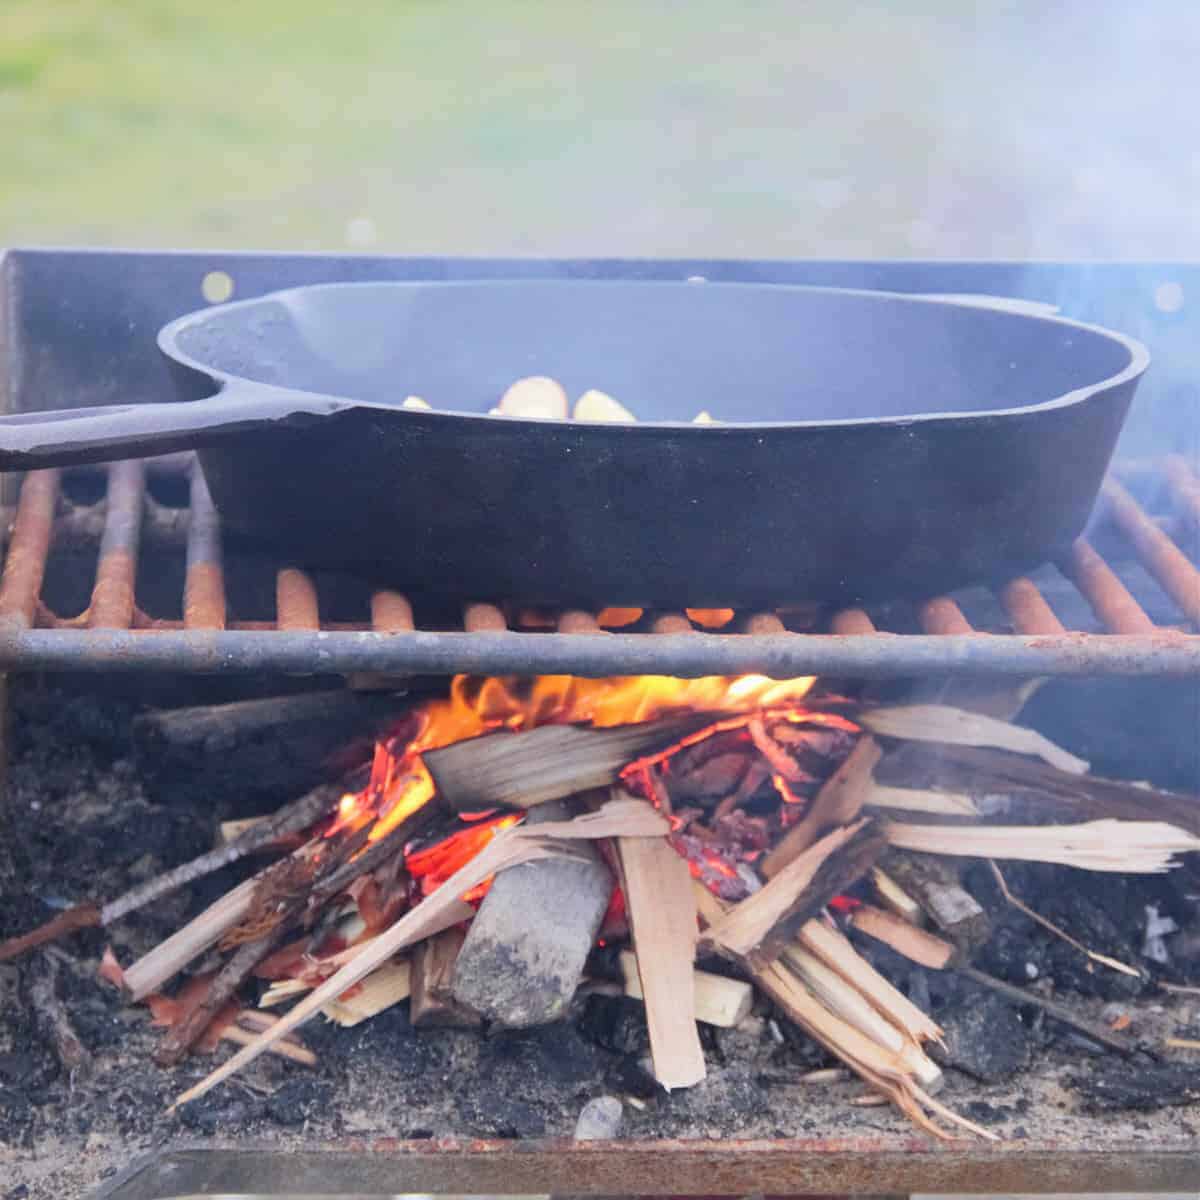 How to Cook Over a Campfire: Expert Tips and Tricks